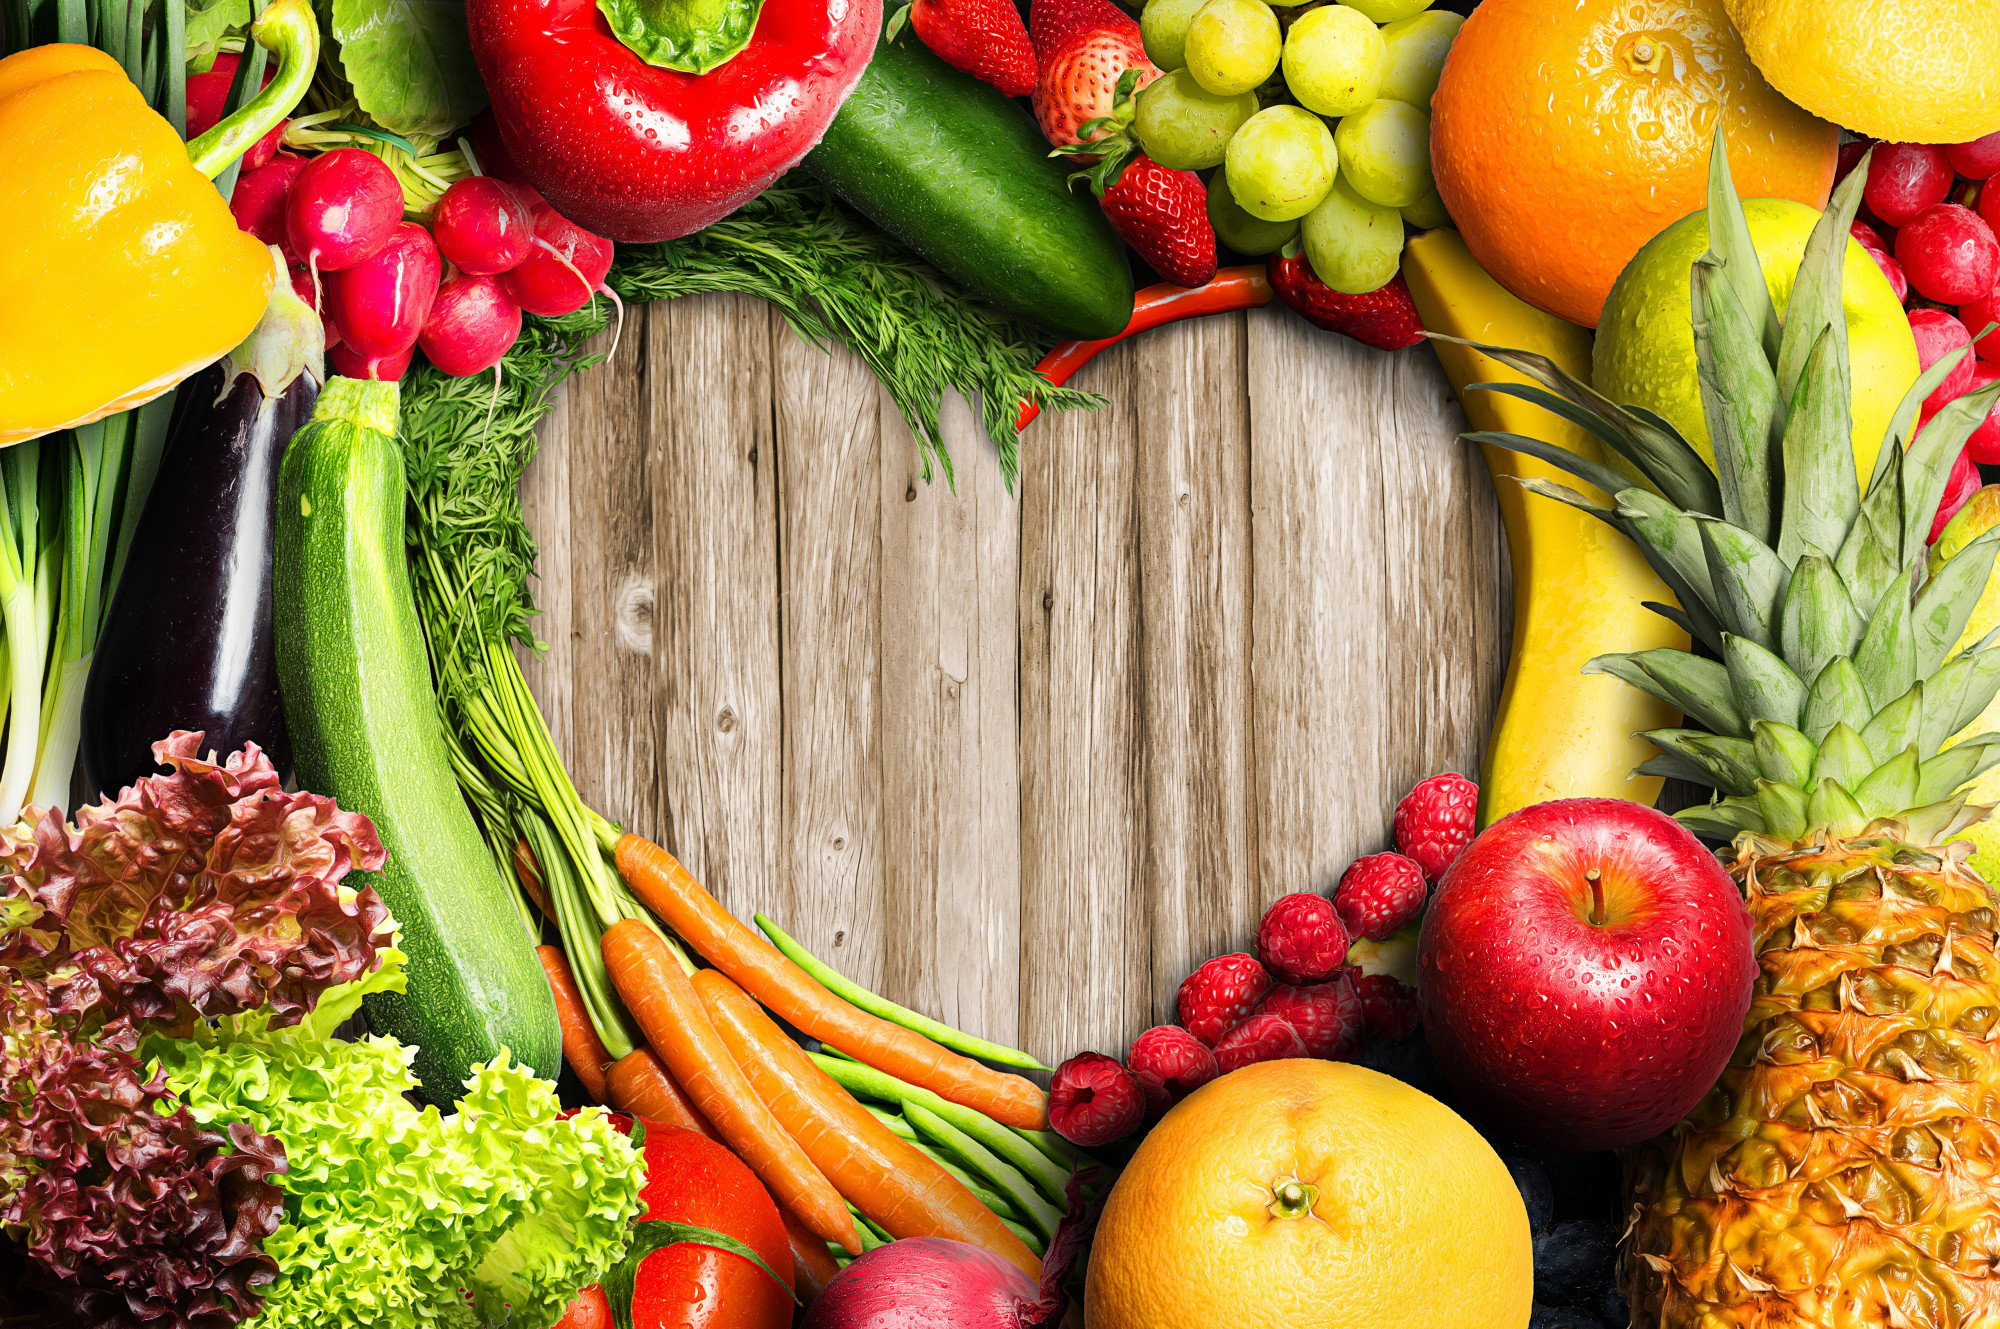 Having a great diet can do wonders for your overall well-being. Check out this guide for some tips on how to eat better forever.